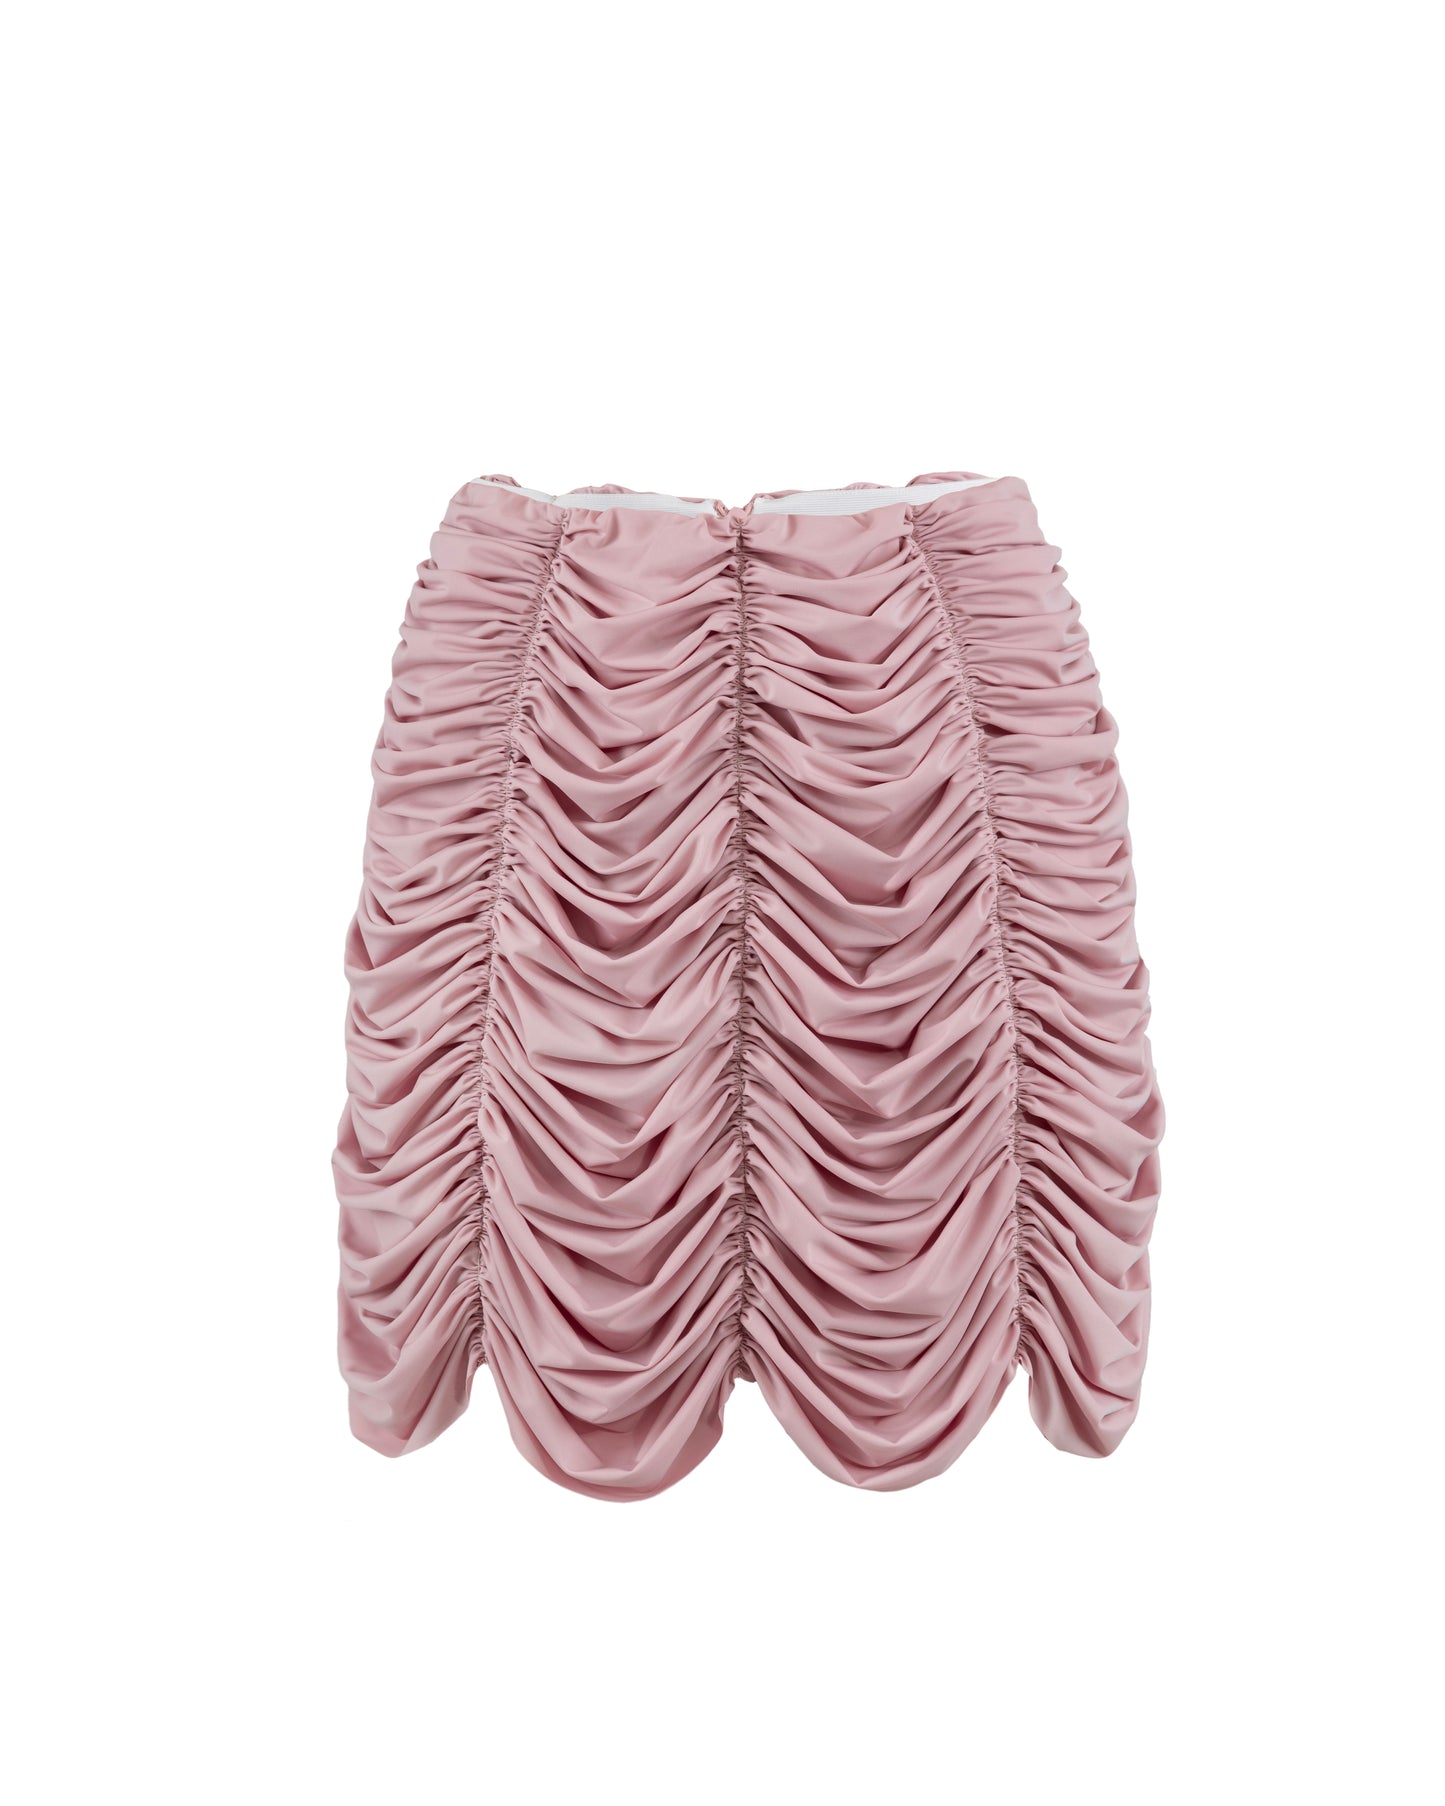 Draped skirt in pink